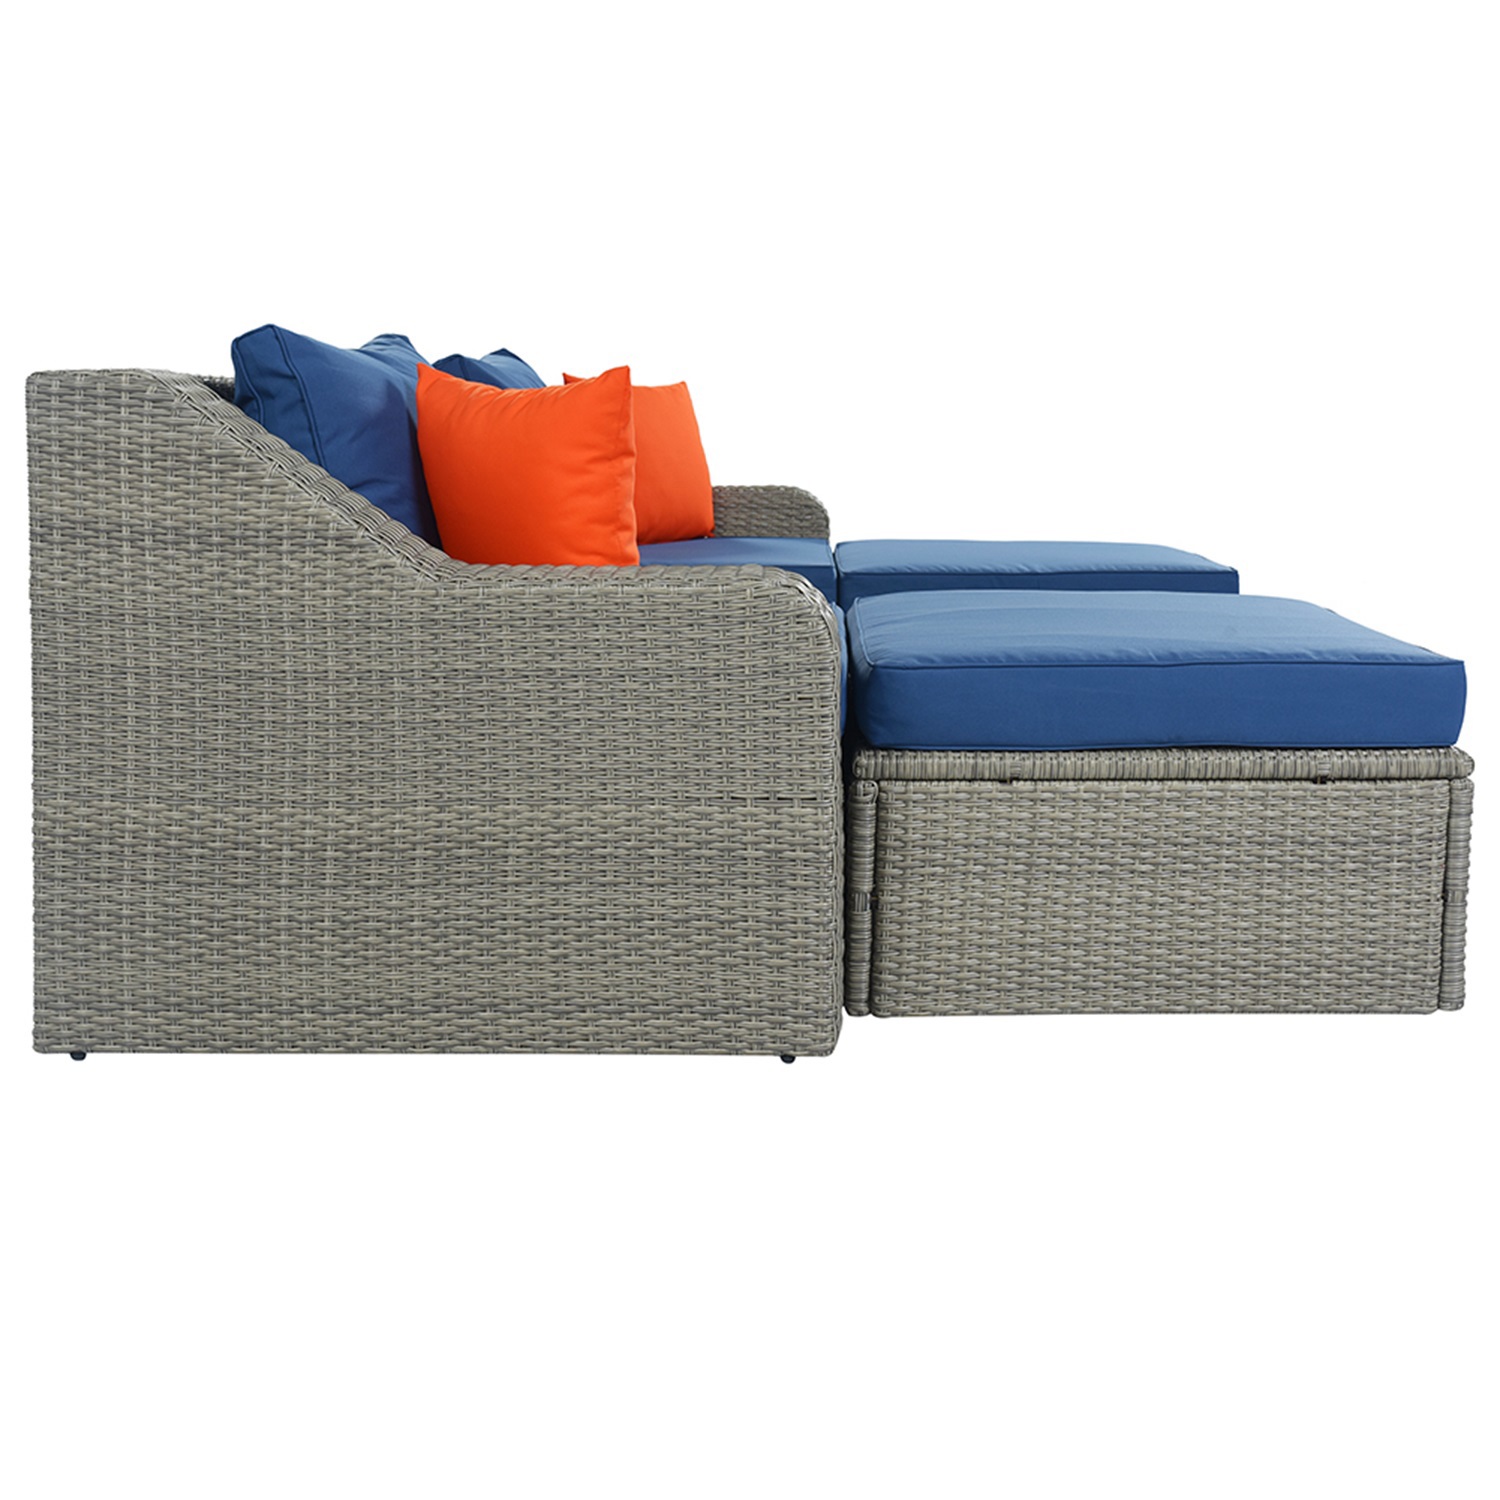 Canddidliike Patio Double Chaise Lounge Sectional Sofa with Lift Top Side Table, Blue Cushions Brown Wicker - image 3 of 8